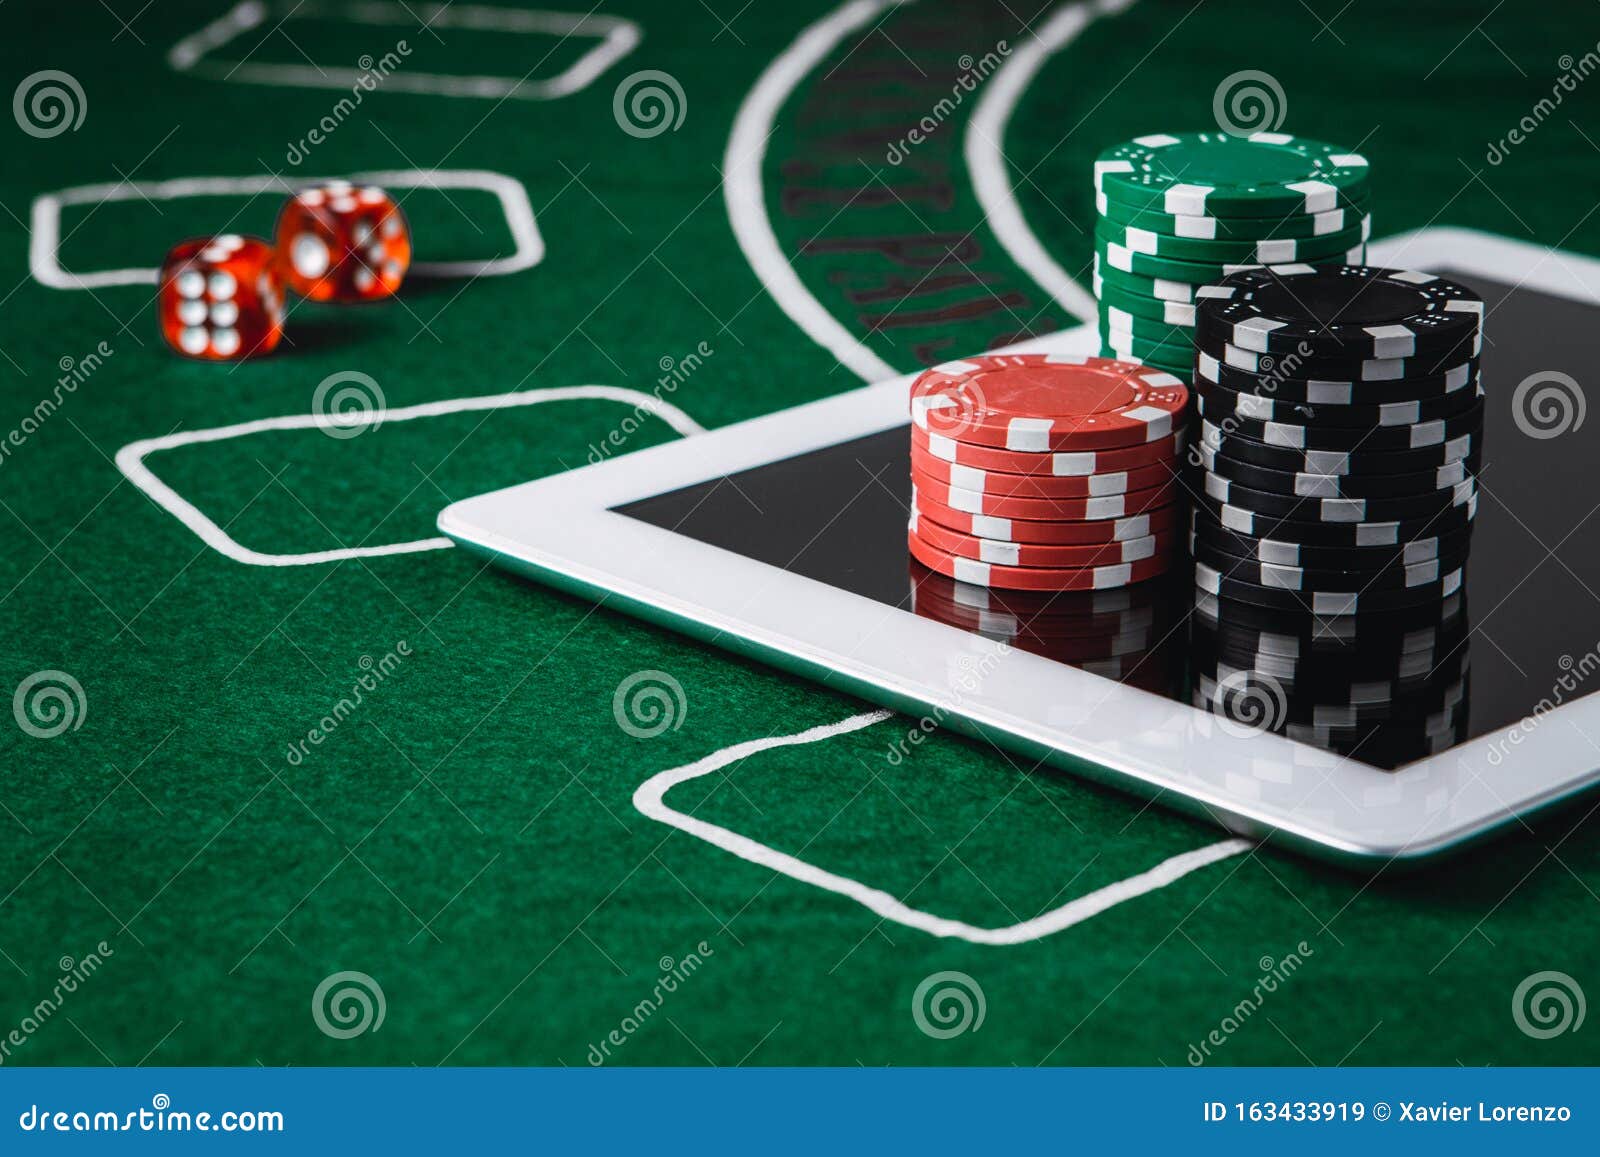 Find Out Now, What Should You Do For Fast play poker online?